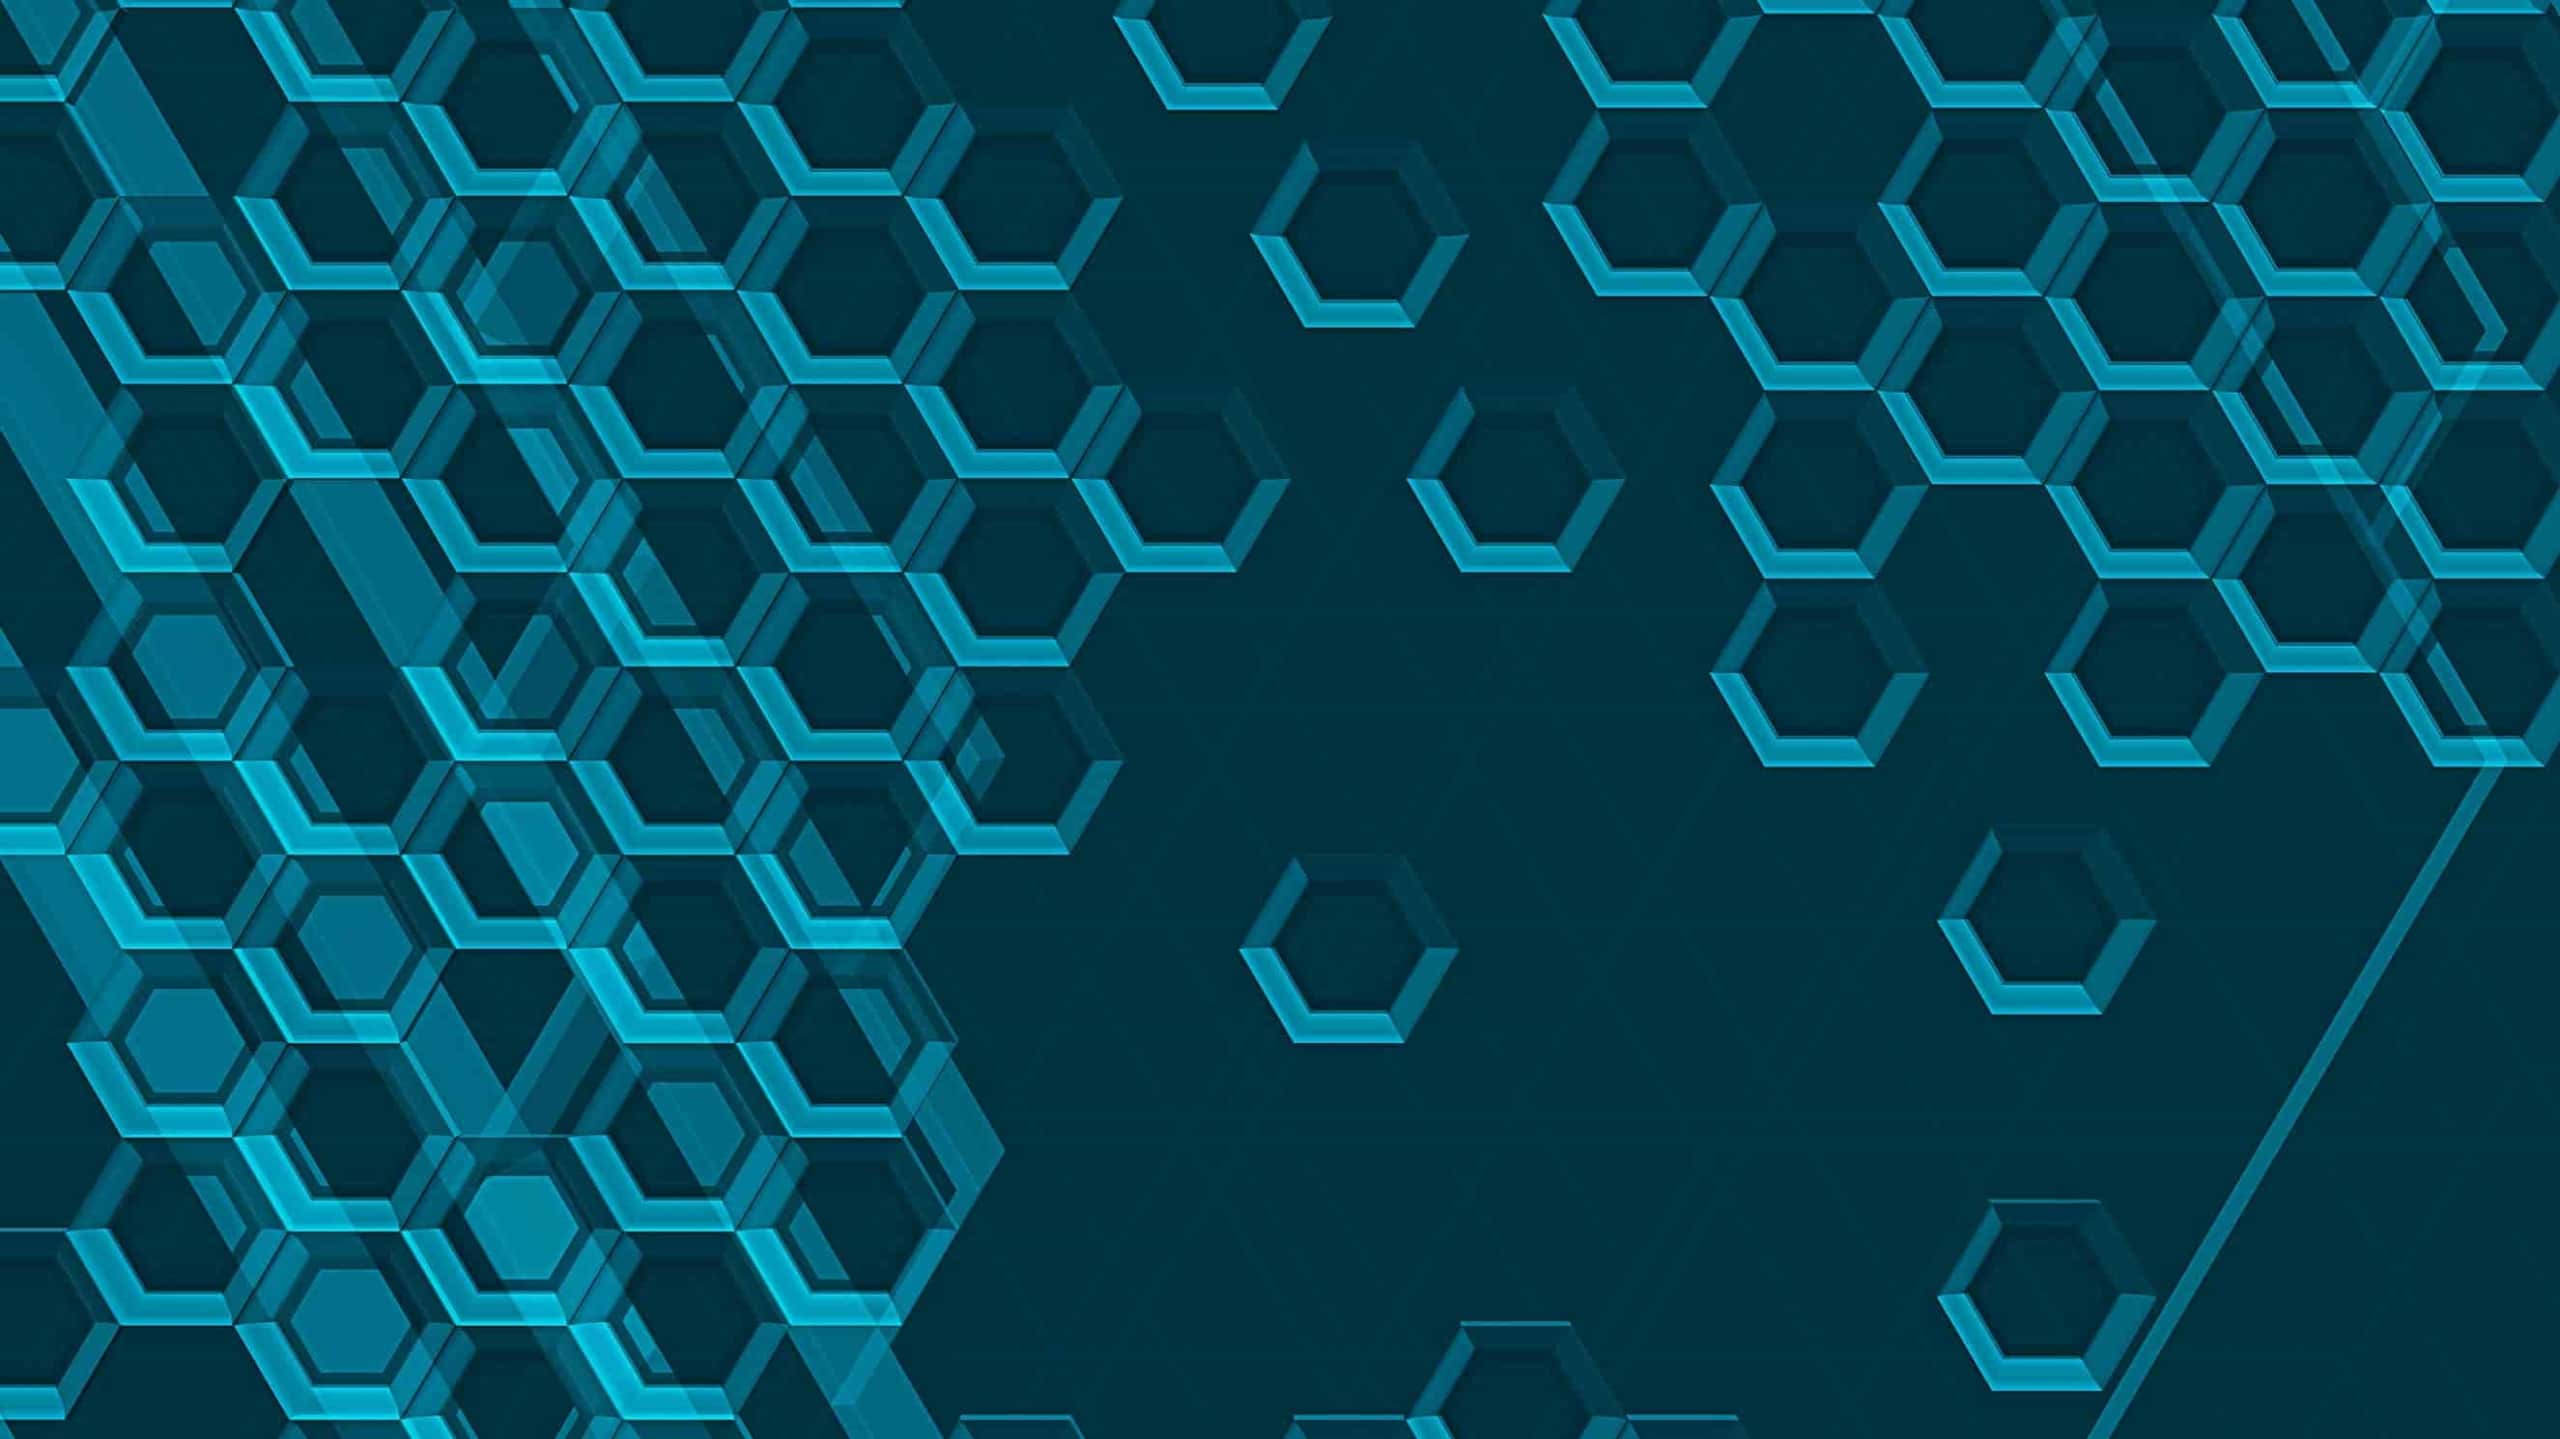 Abstract background featuring a pattern of overlapping hexagons in varying shades of blue, creating a 3d effect with a diagonal gradient from dark to light blue.